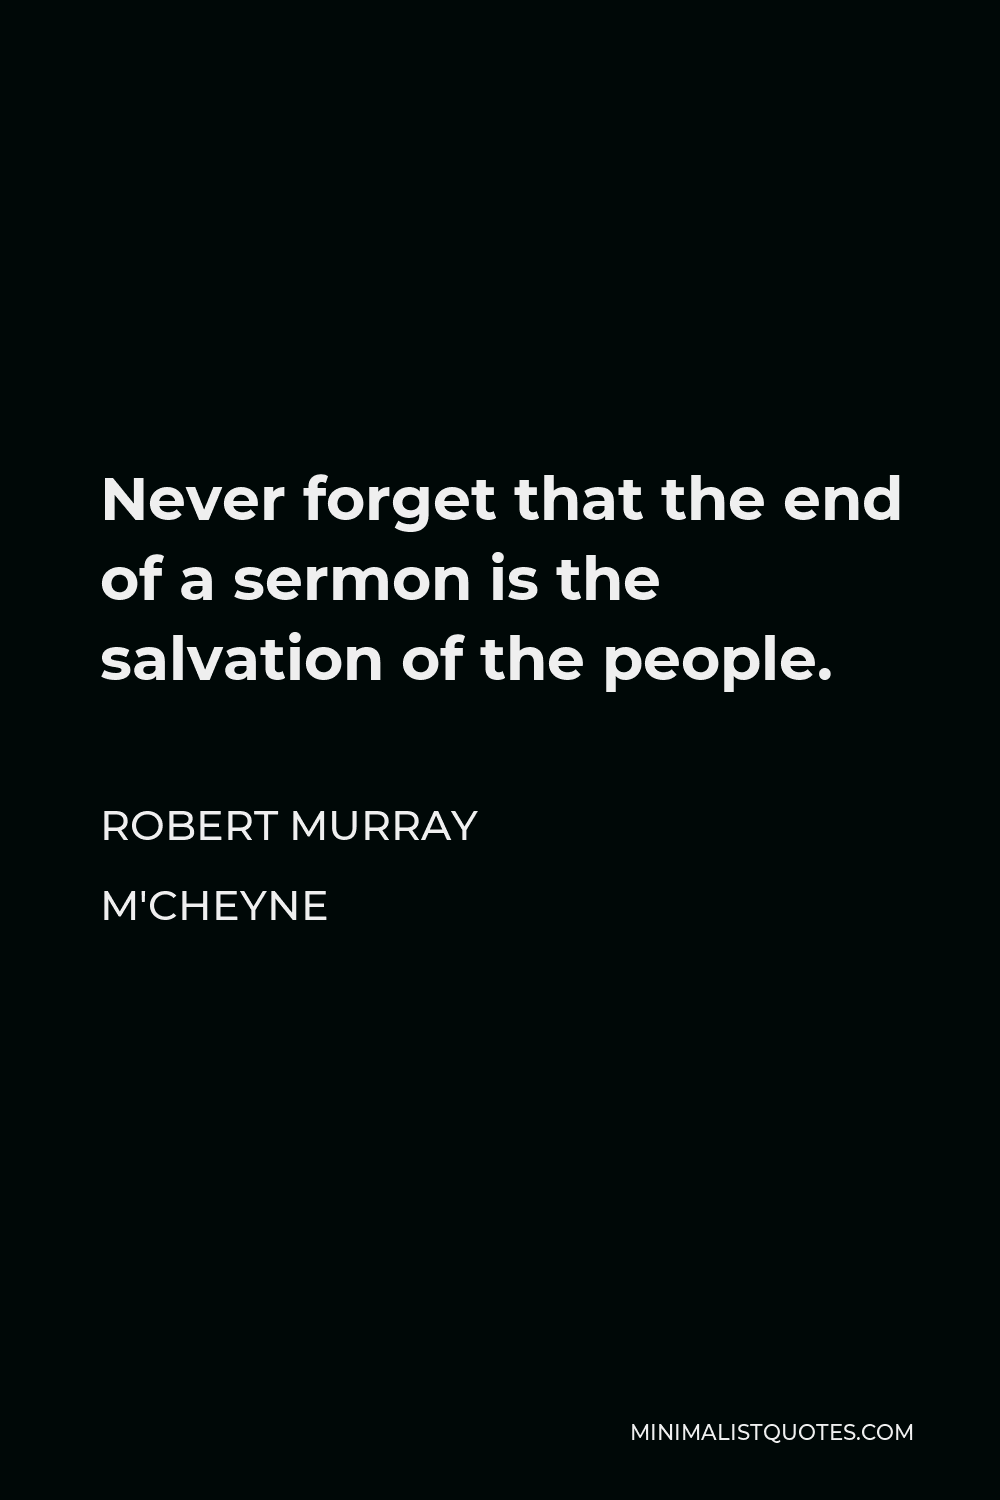 Robert Murray M'Cheyne Quote - Never forget that the end of a sermon is the salvation of the people.